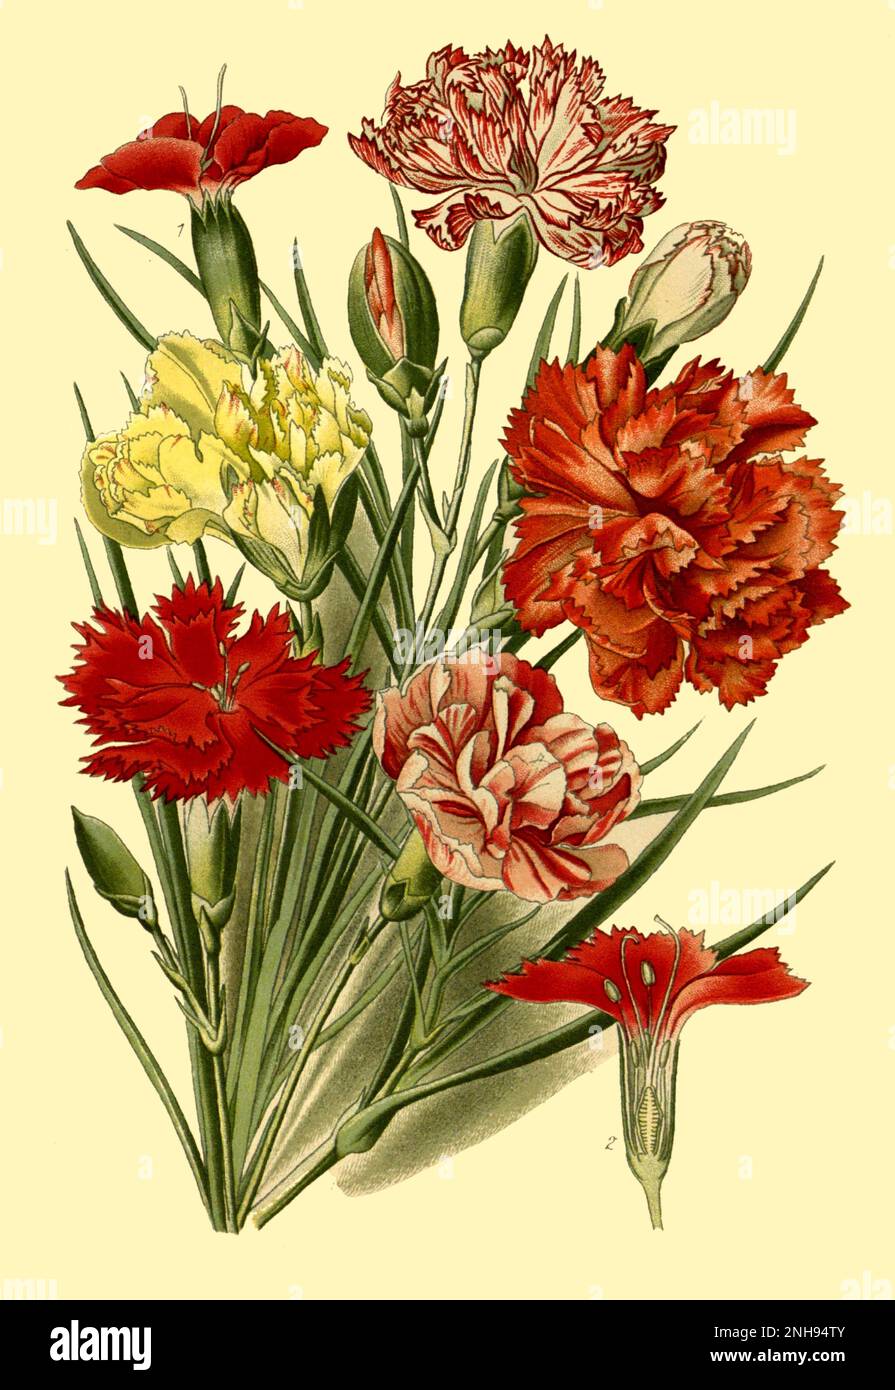 Carnation, Dianthus caryophyllus, also called grenadine or clove pink. In 1716, English botanist Thomas Fairchild (c.1667-1729) created the world's first man-made hybrid plant, Dianthus Caryophyllus barbatus, known as Fairchild's Mule. It was a cross between a Sweet William (Dianthus barbatus) and a pink carnation (Dianthus caryophyllus), the latter shown here. Stock Photo